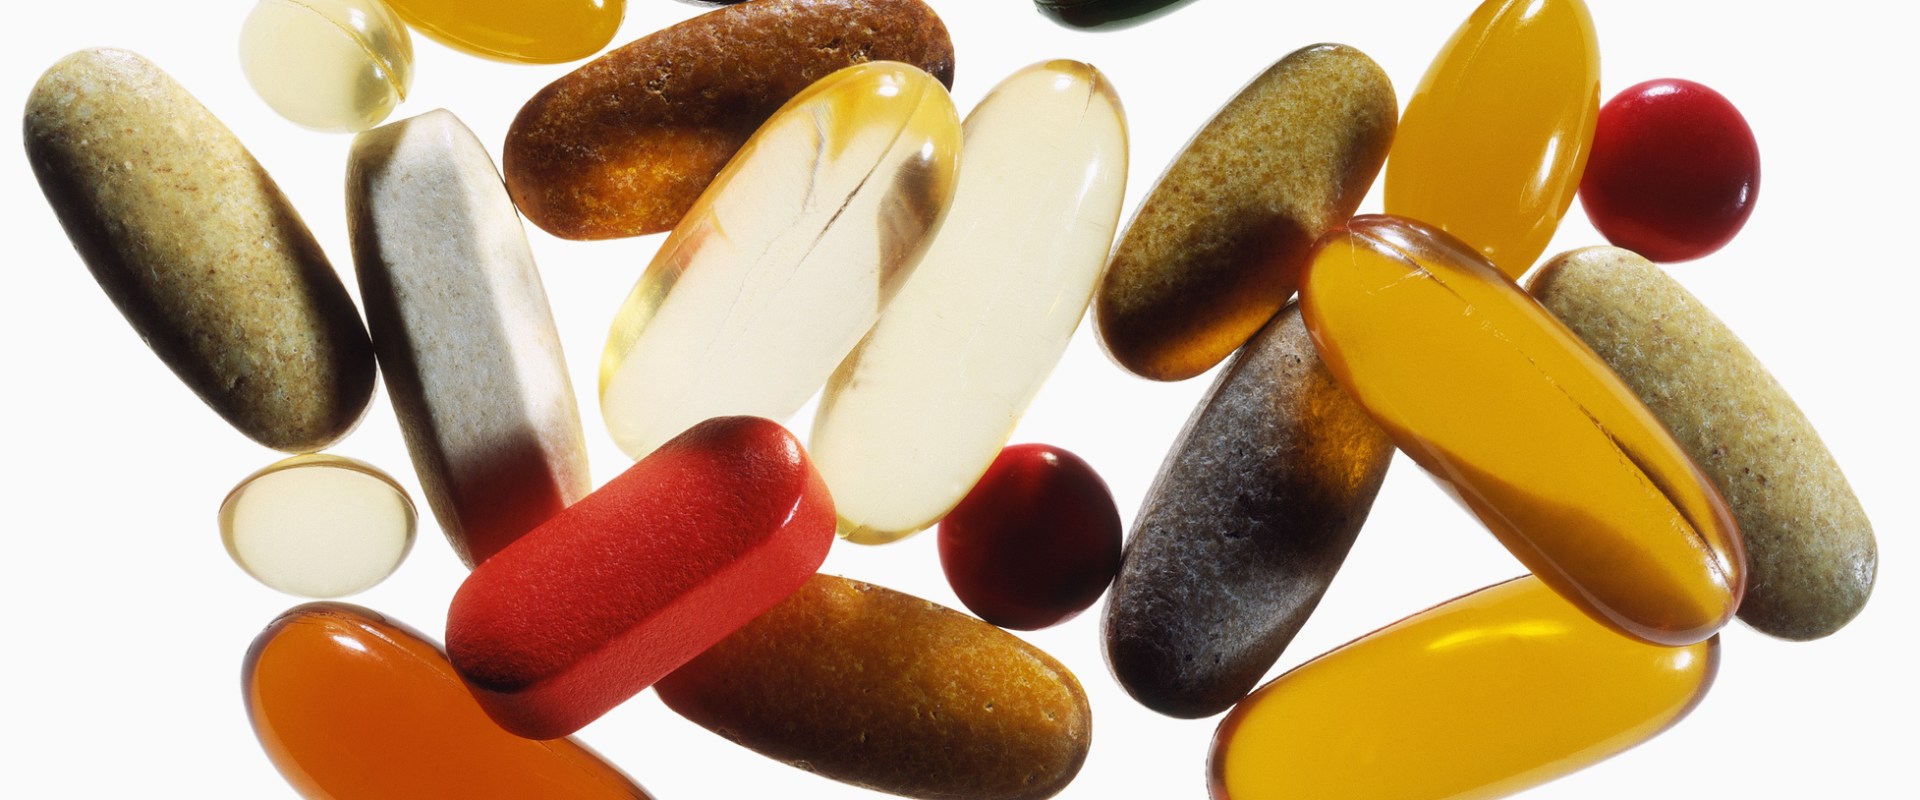 The Benefits and Risks of Taking Nutritional Supplements